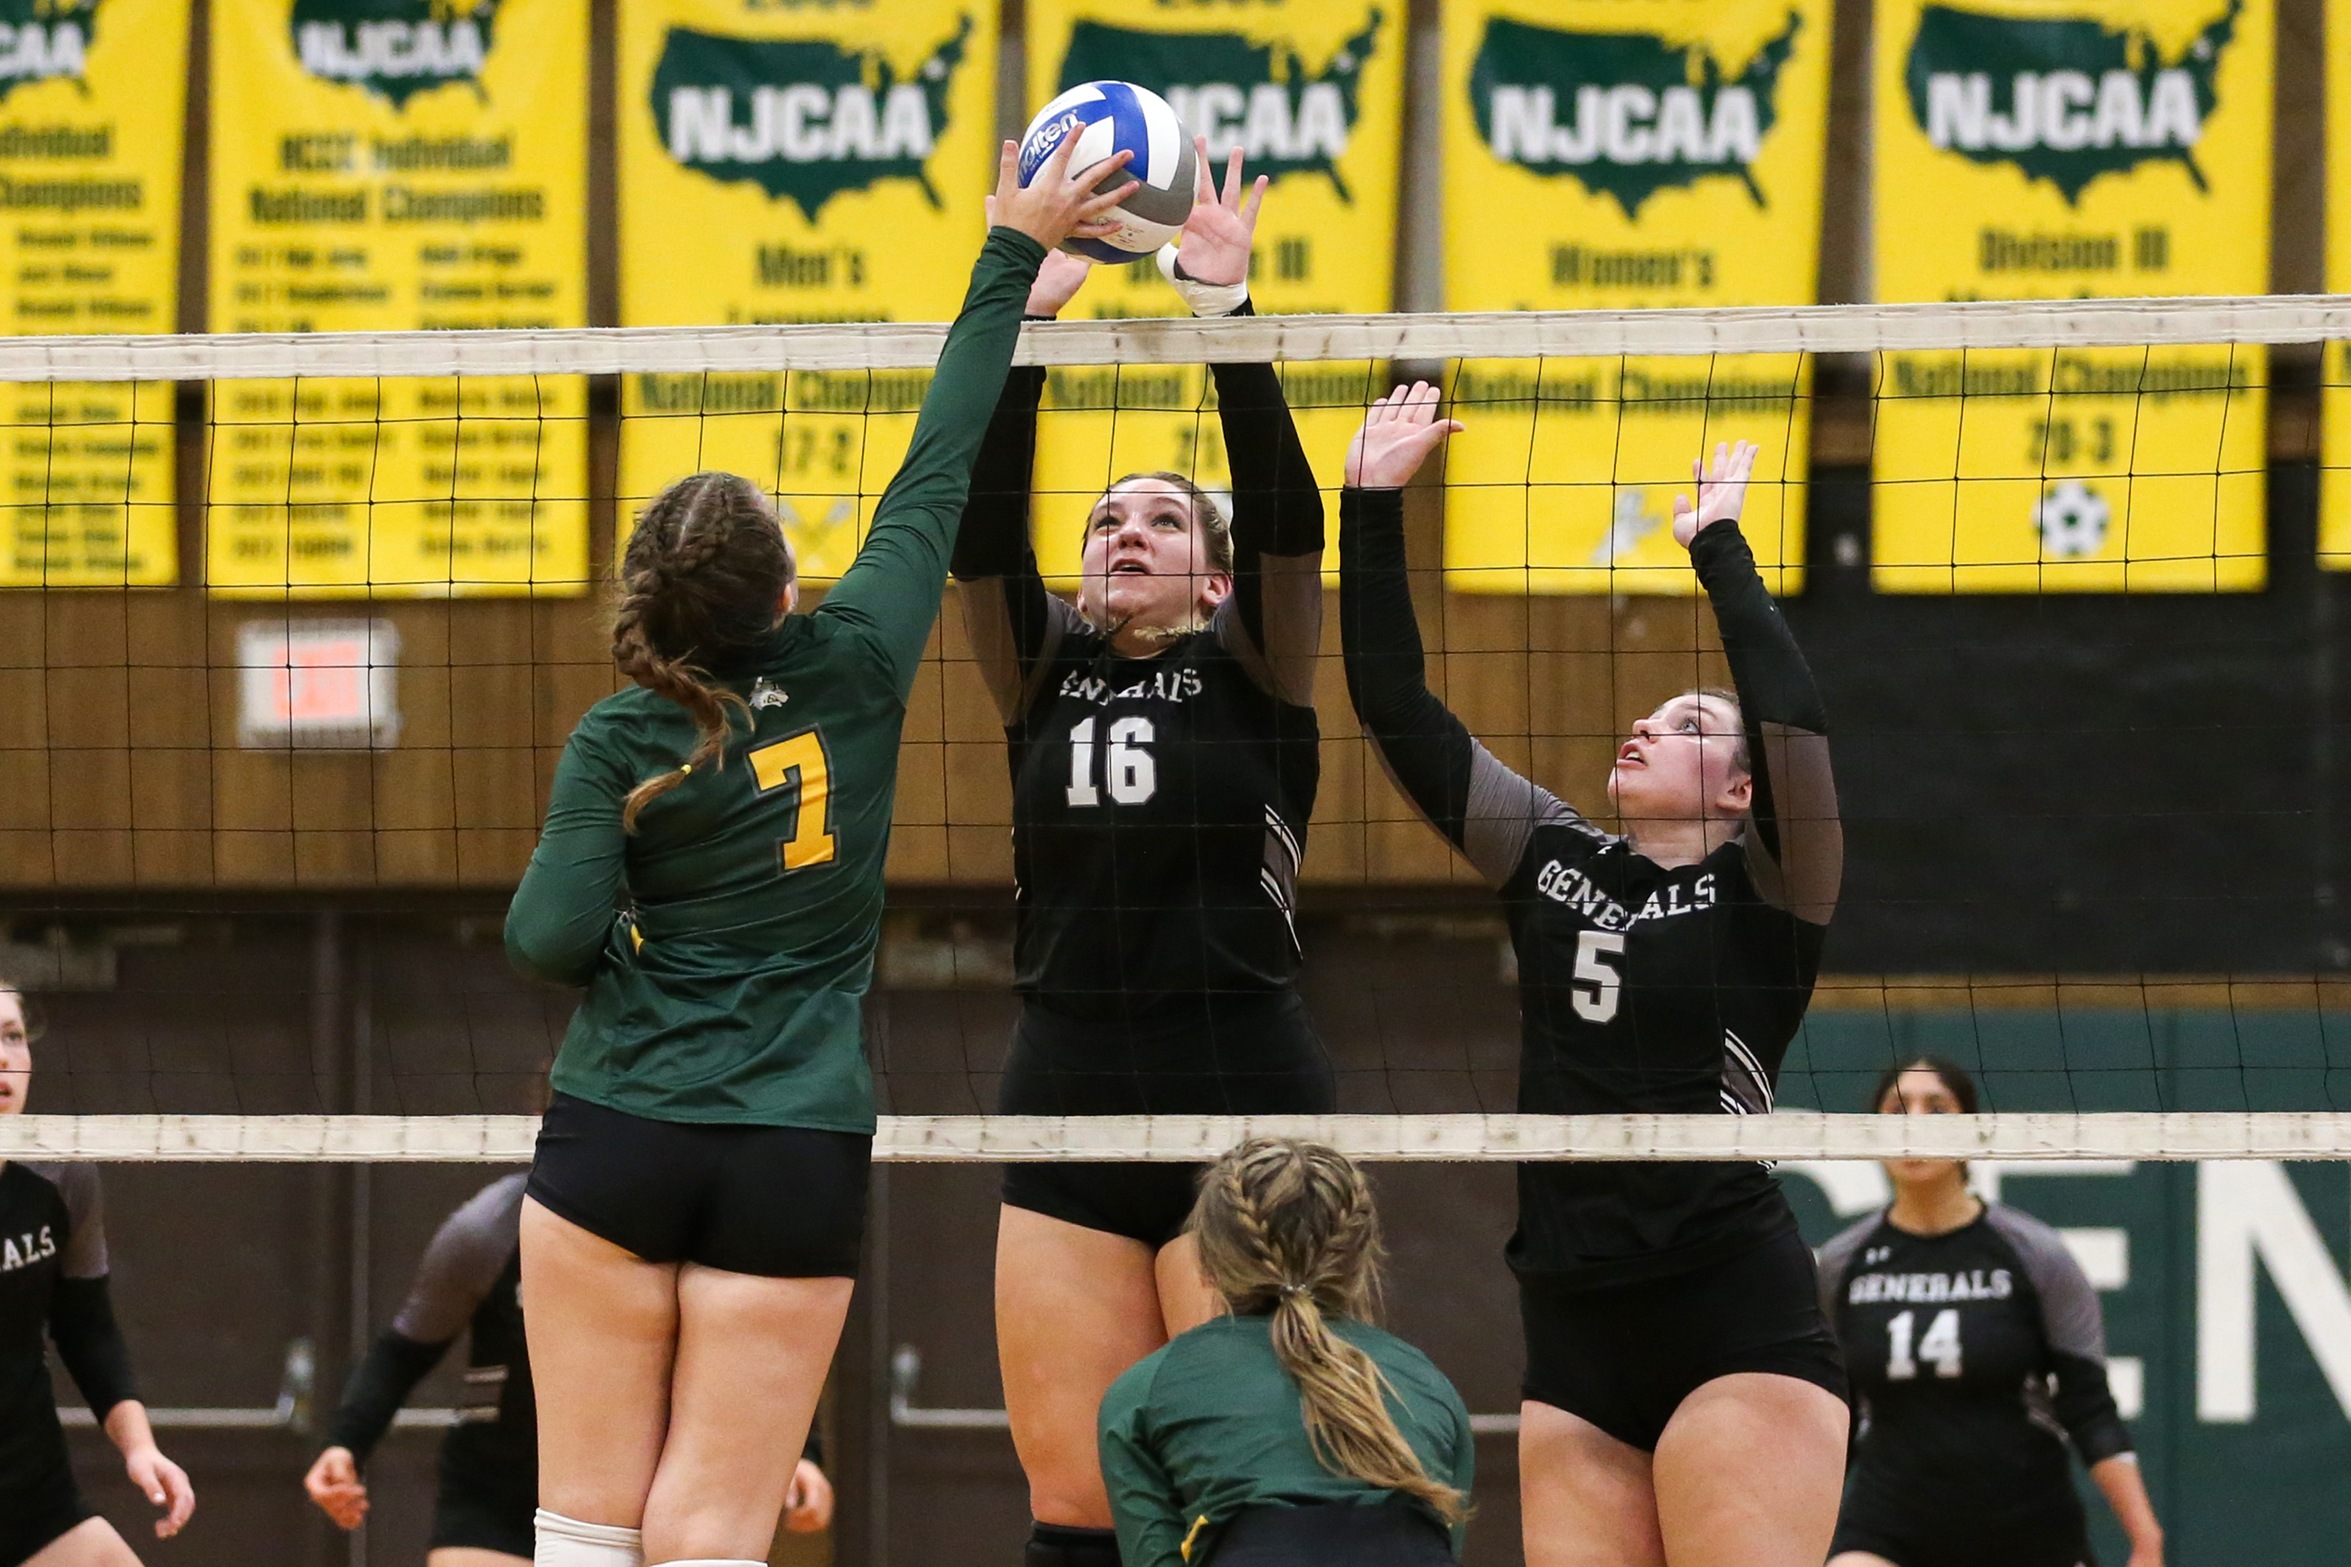 Volleyball Falls to SUNY Adirondack in MVC Matchup